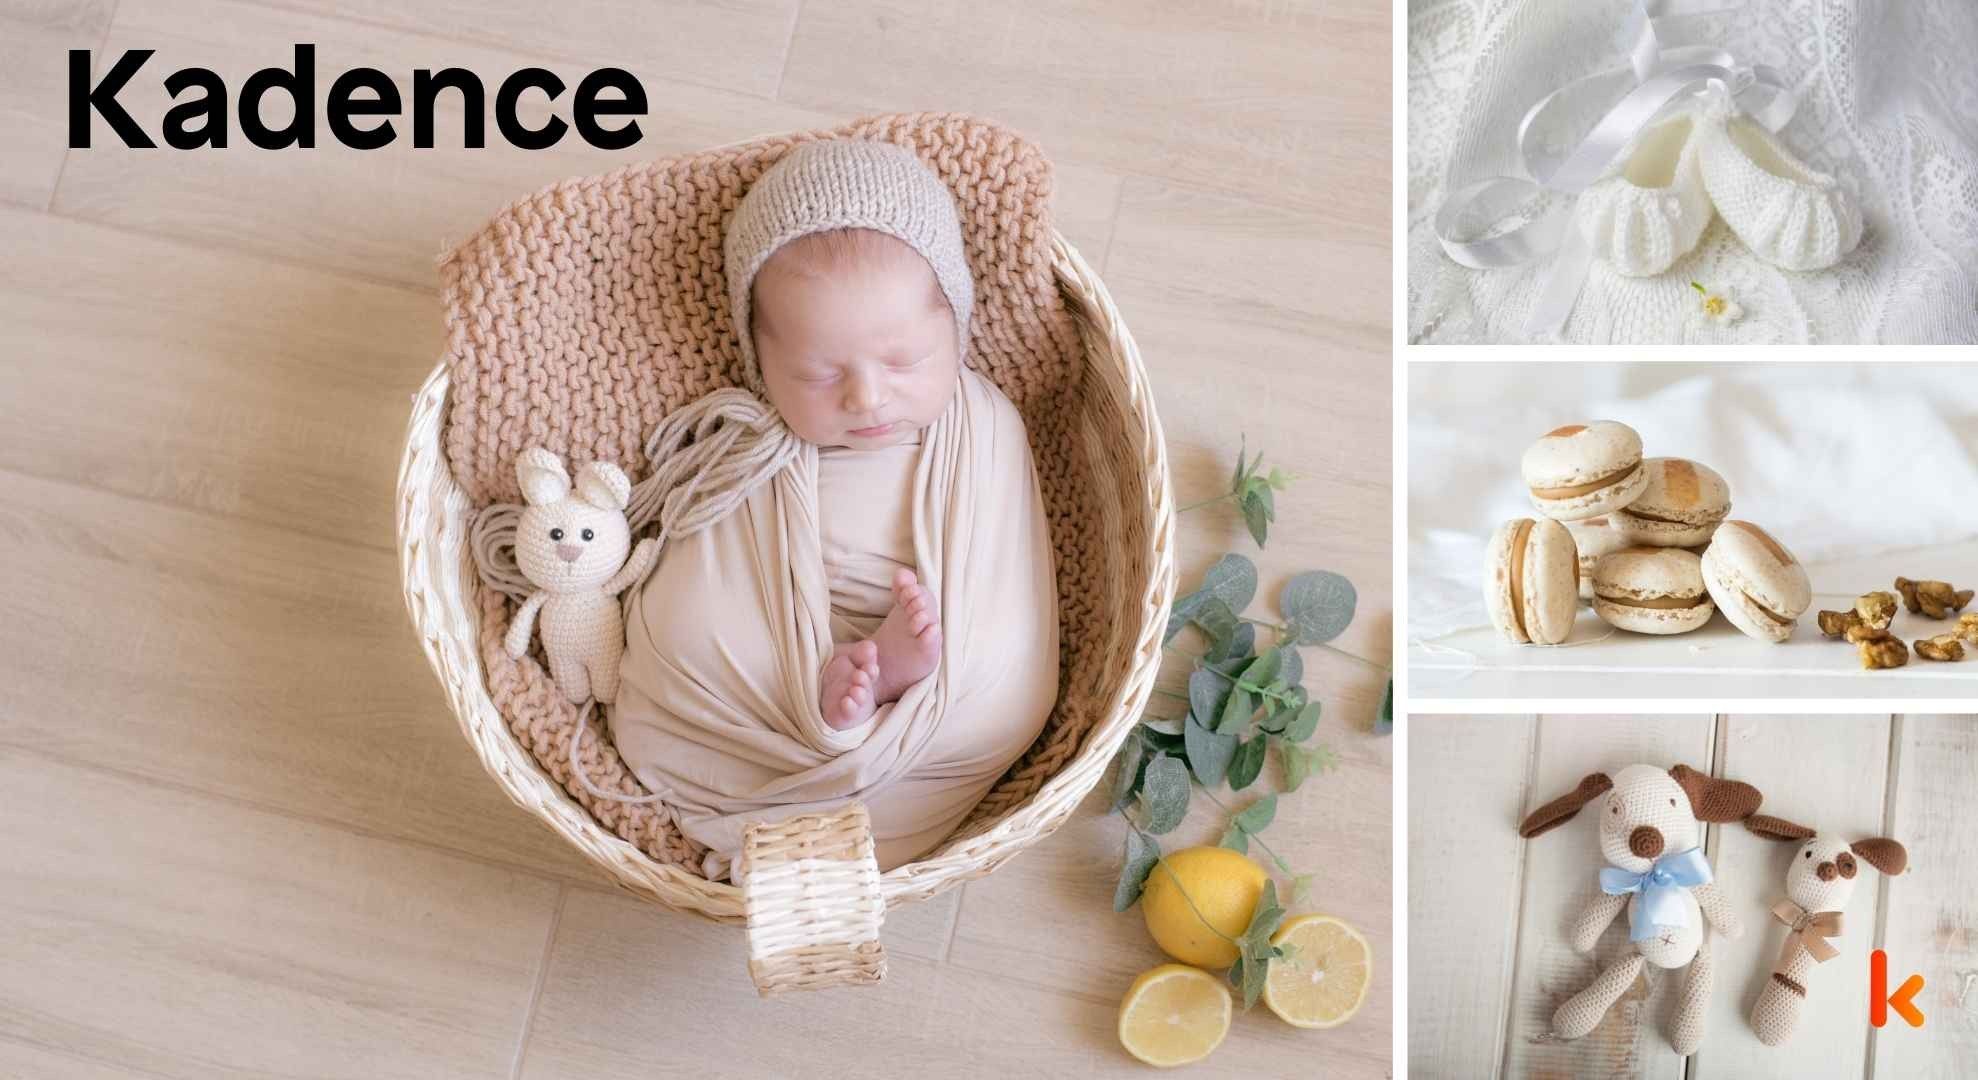 Meaning of the name Kadence